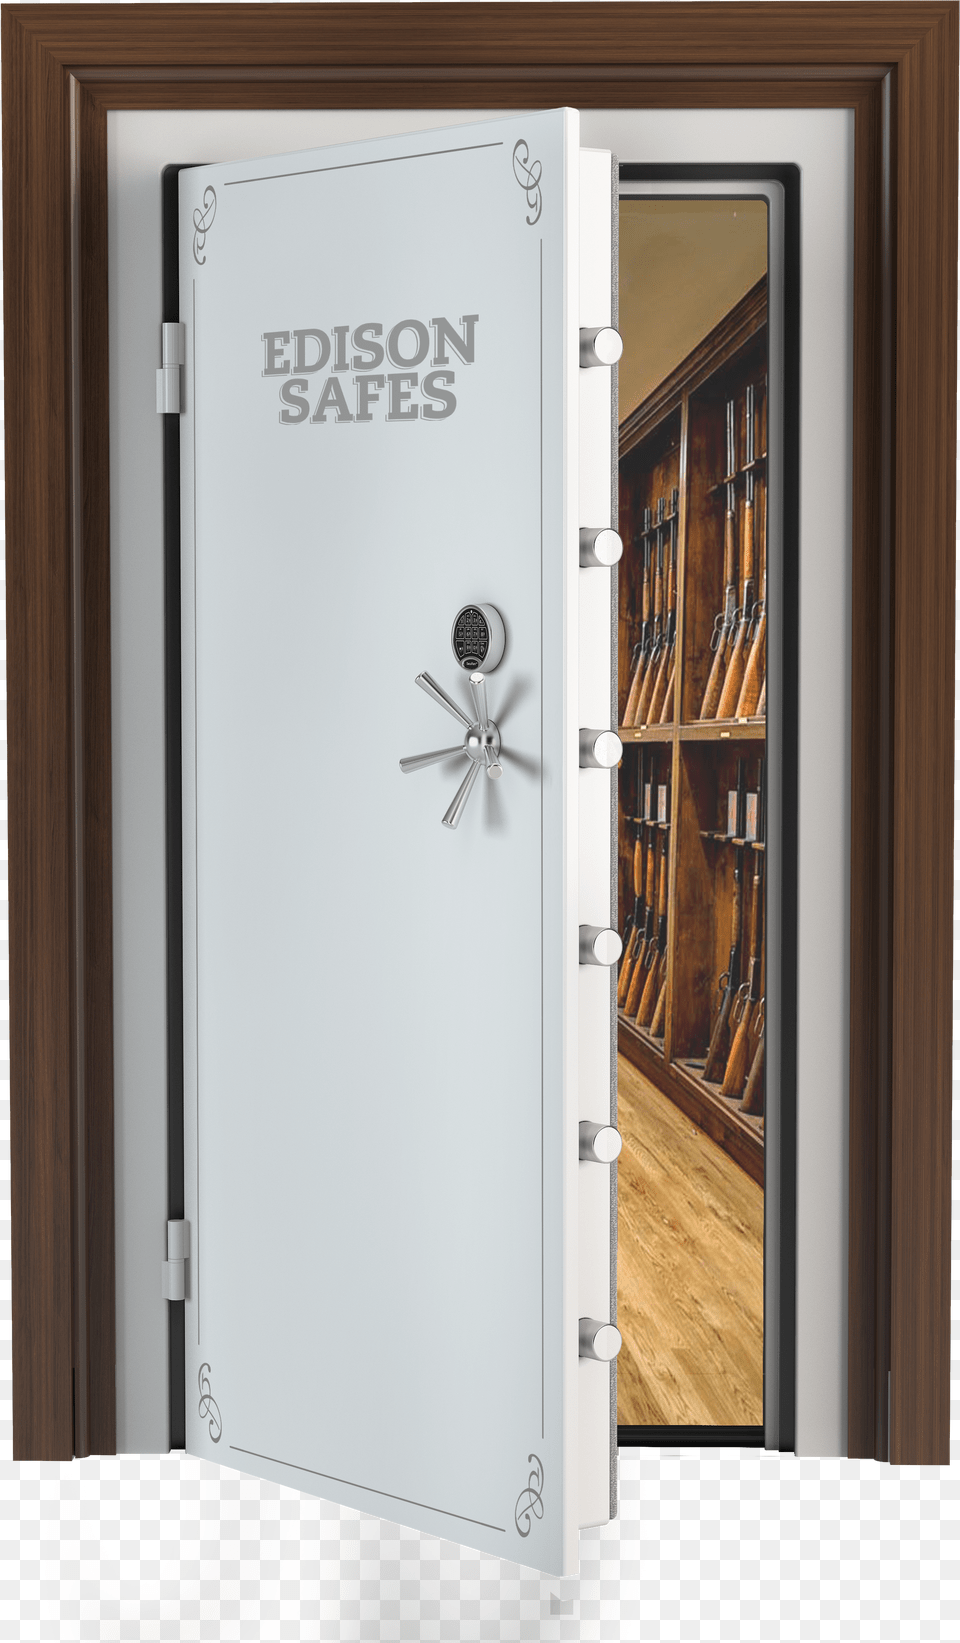 This Edison Vault Door Is Available In Many Different Free Transparent Png